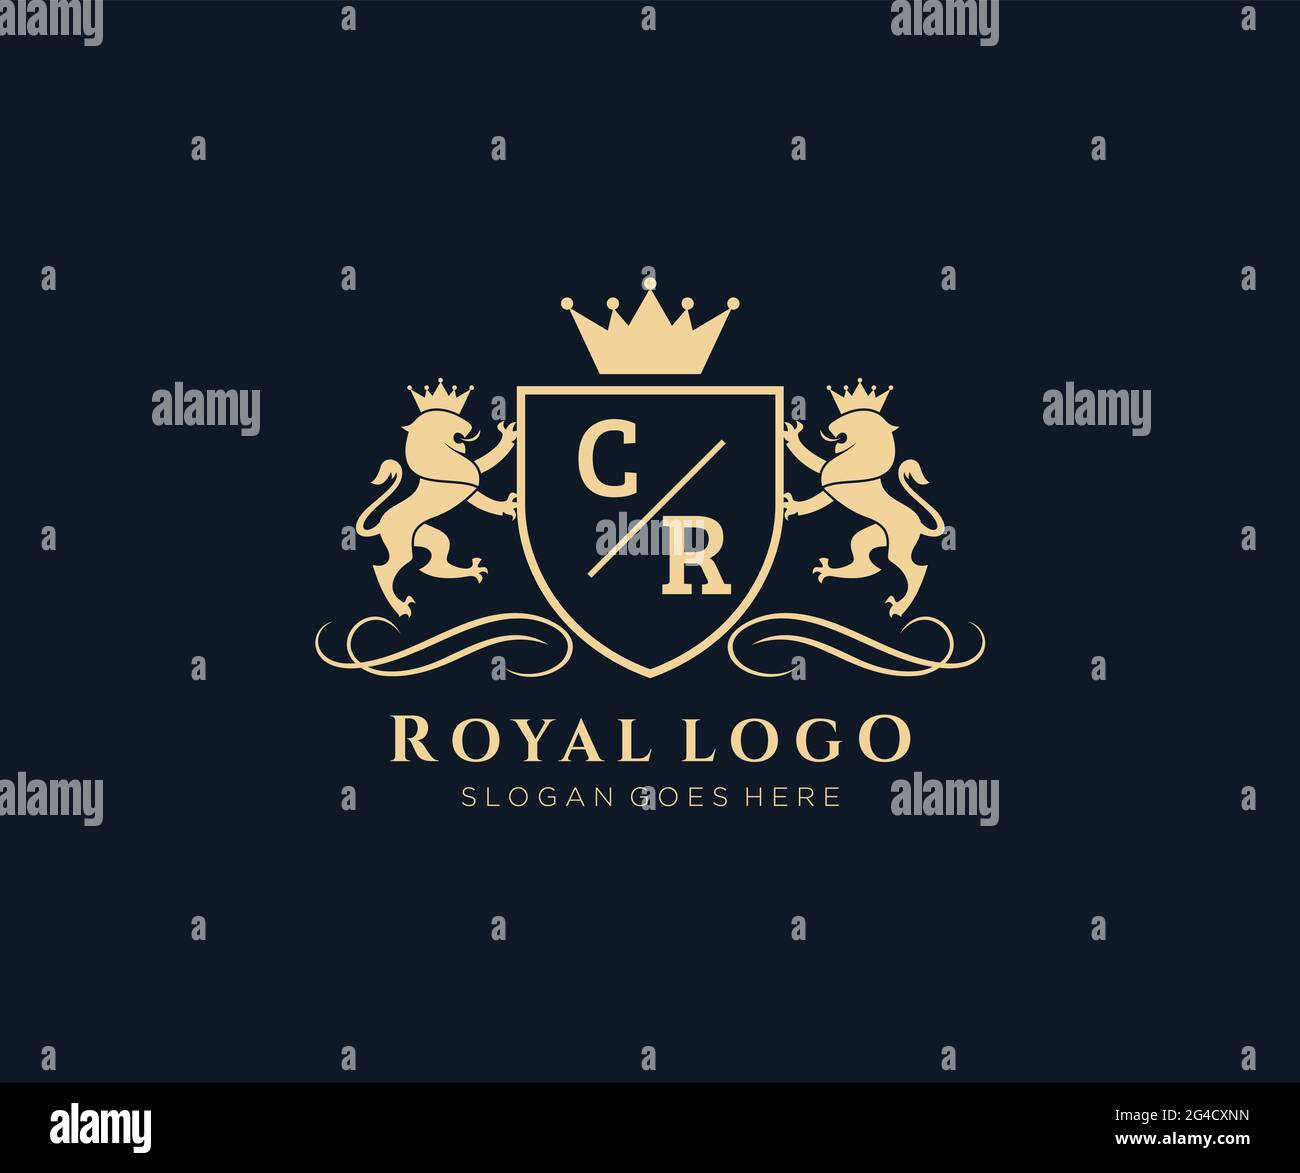 CR Letter Lion Royal Luxury Heraldic,Crest Logo template in vector art for Restaurant, Royalty, Boutique, Cafe, Hotel, Heraldic, Jewelry, Fashion and Stock Vector